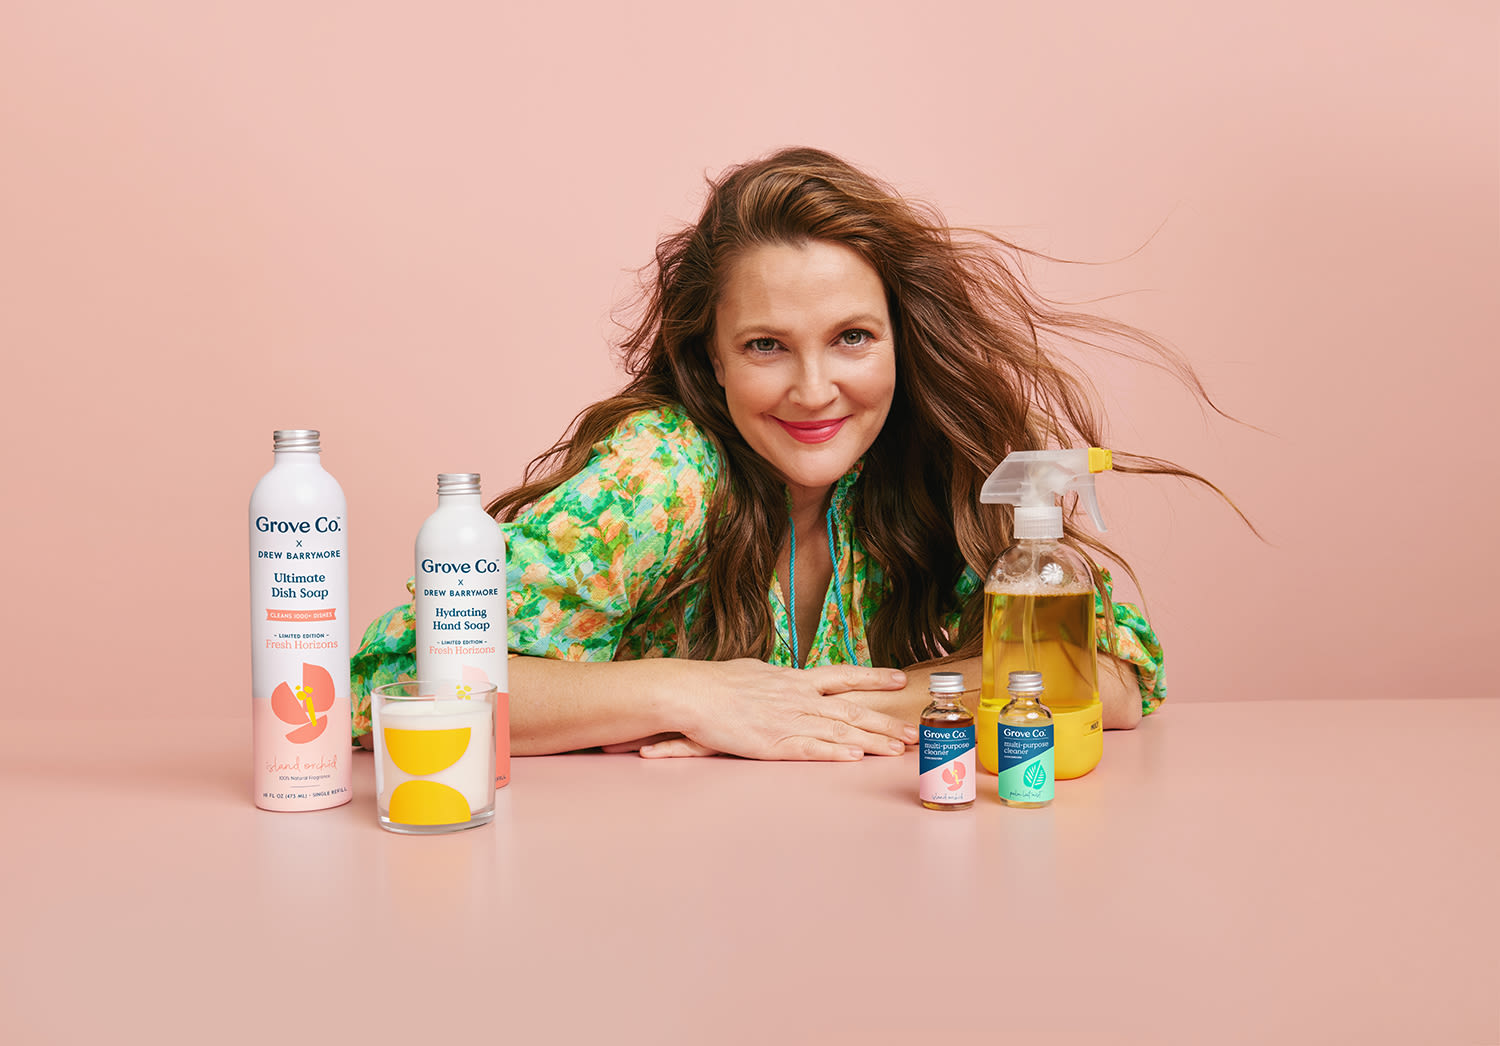 Drew Barrymore posing with her Grove Co. collection products